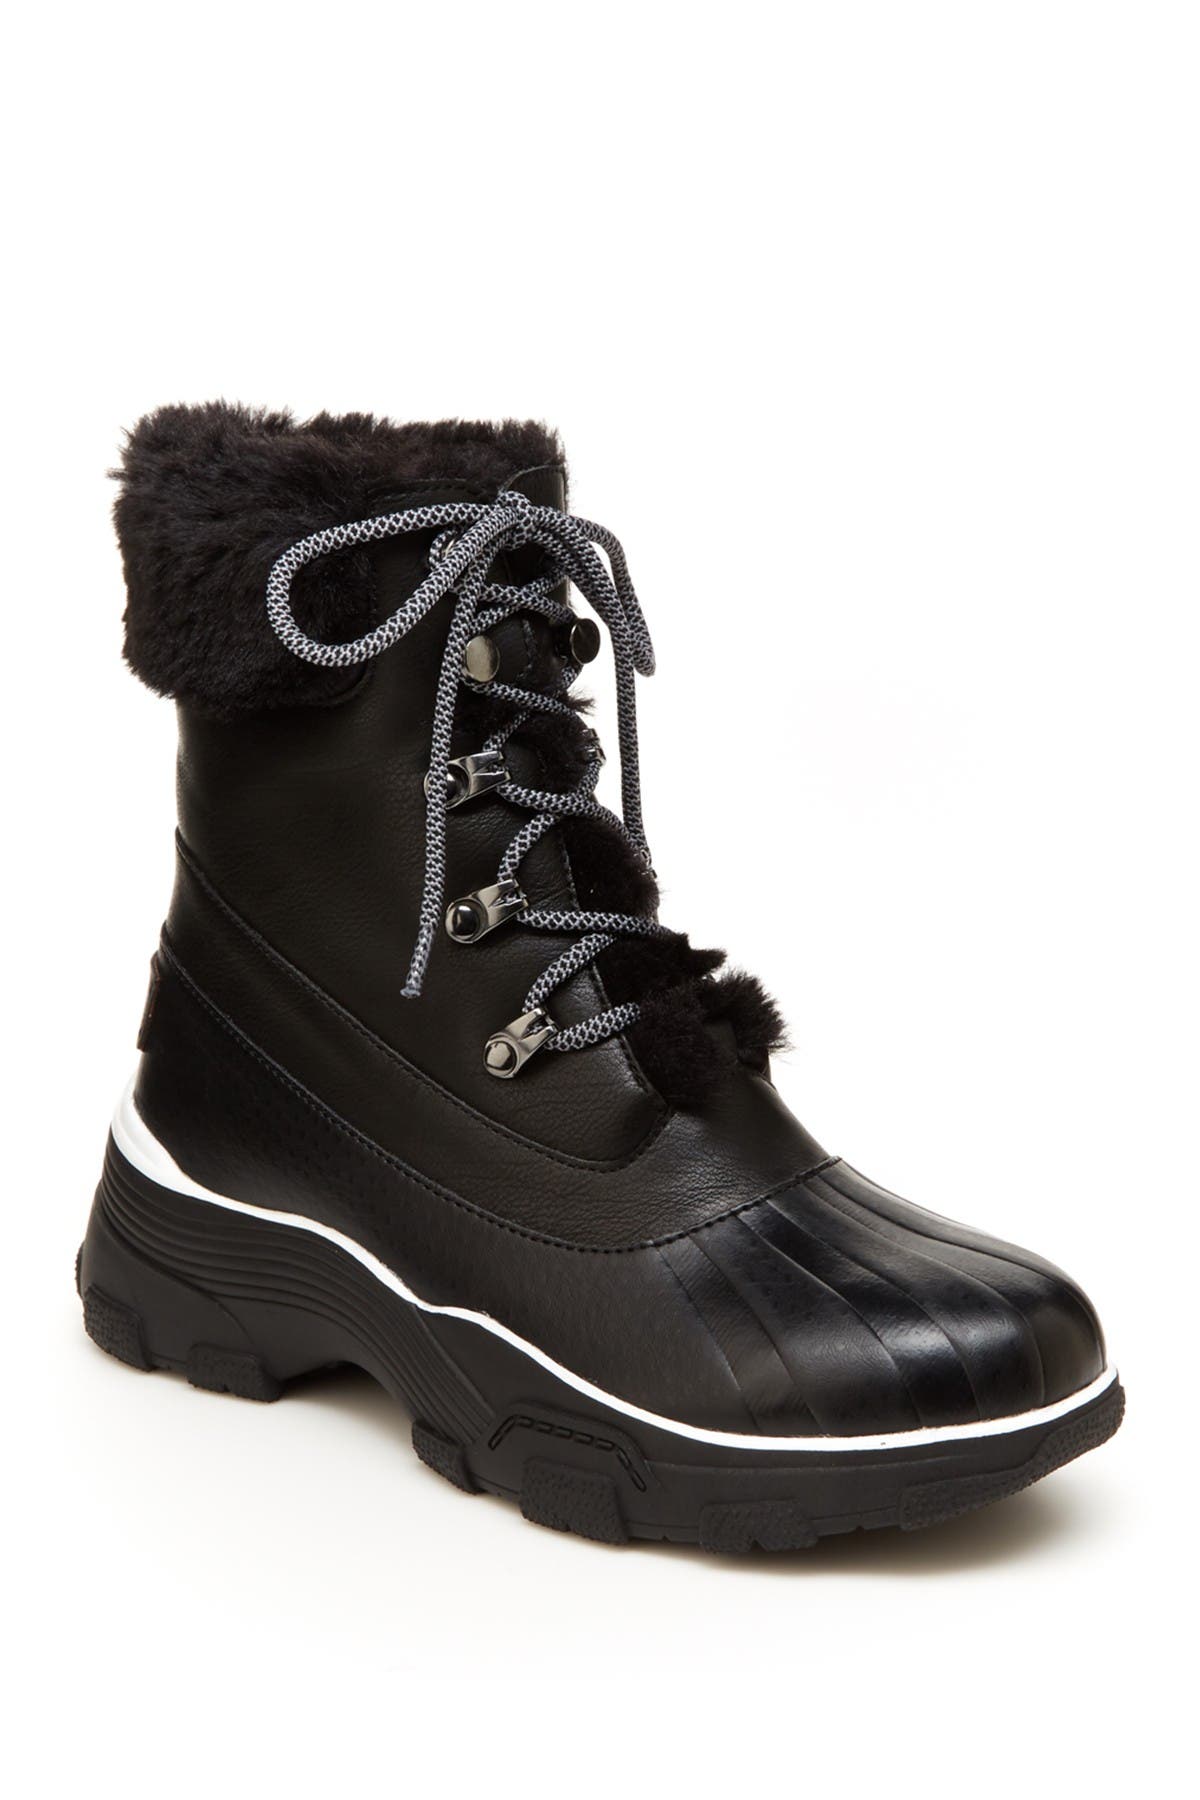 nordstrom rack womens hiking boots